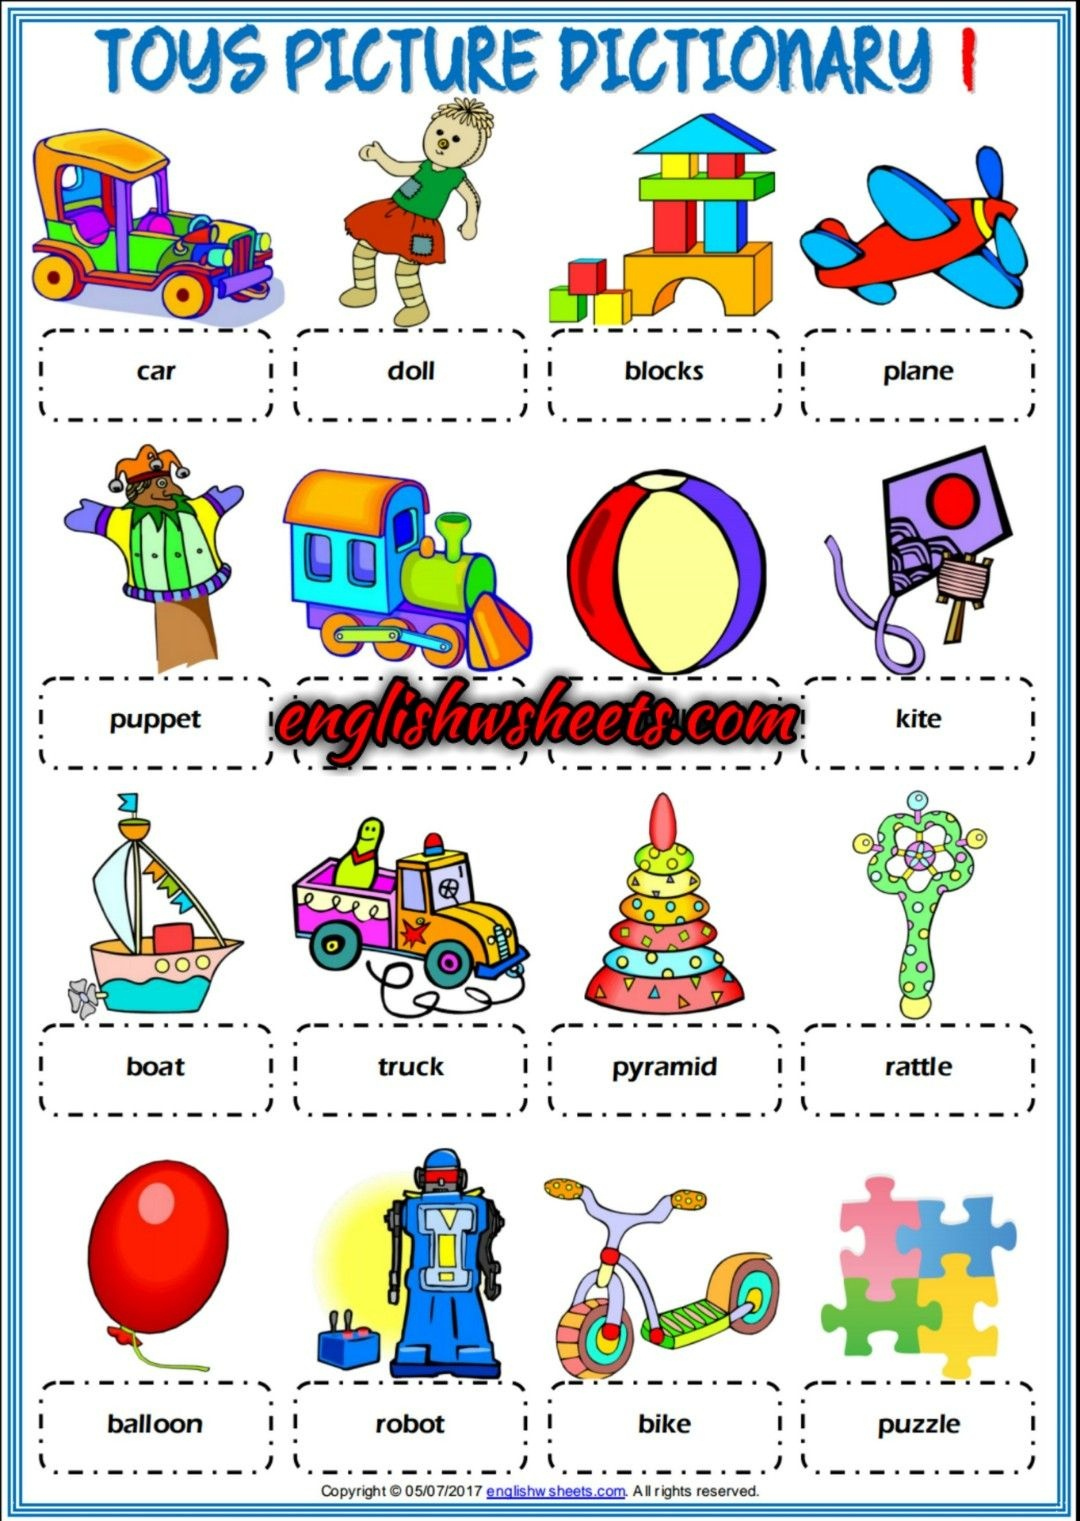 Rooms In The House Free Esl Efl Worksheets Madeteachers For Free 